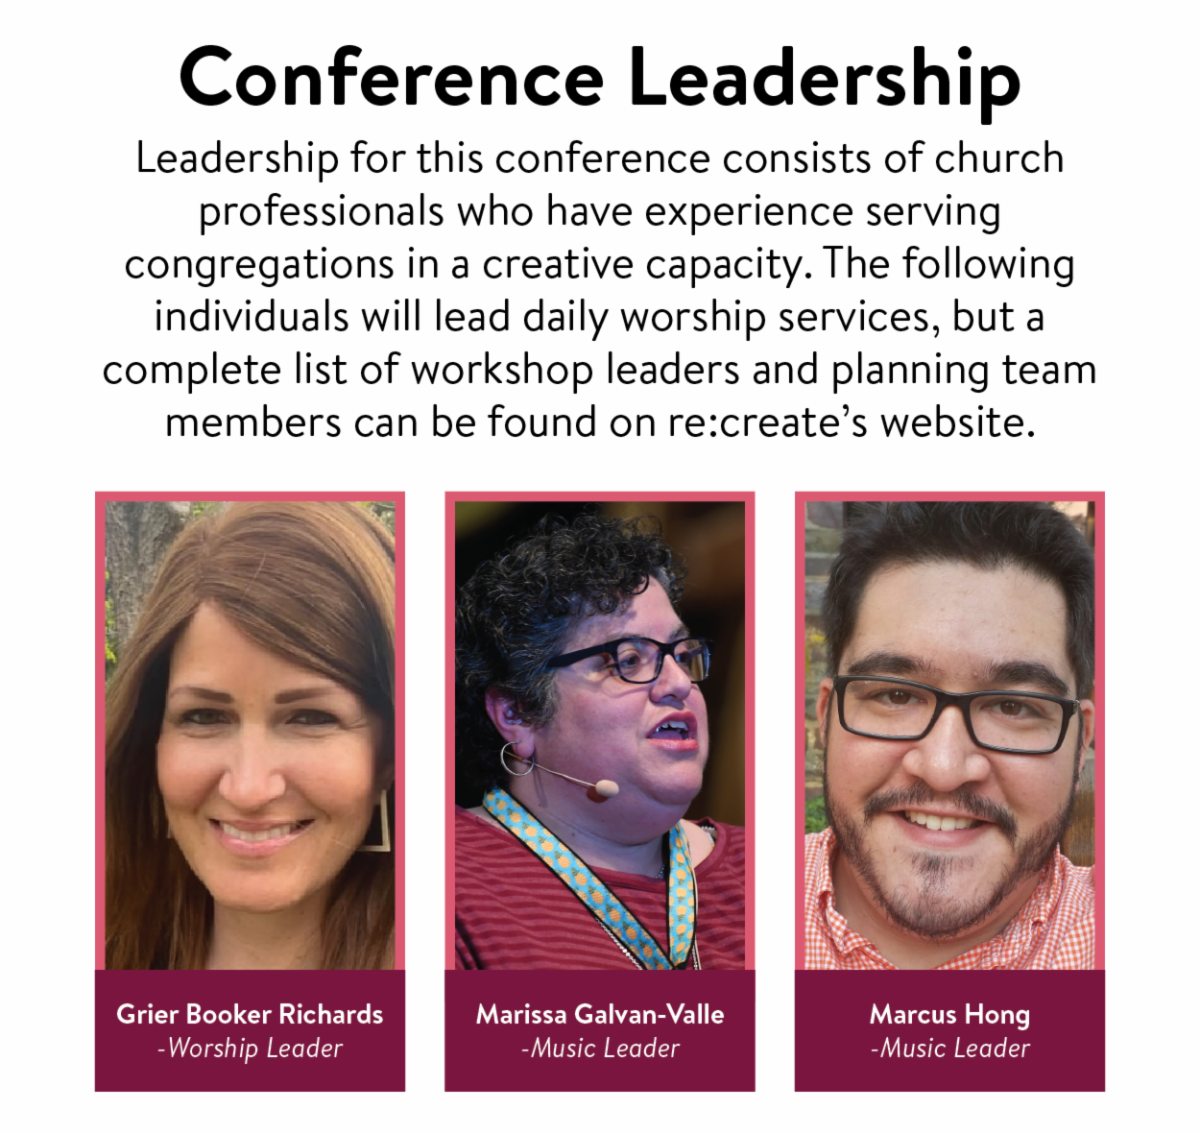 Conference Leadership - Leadership for this conference consists of church professionals who have experience serving congregations in a creative capacity. The following individuals will lead daily worship services, but a complete list of workshop leaders and planning team members can be found on re:create’s website. Grier Booker Richards - Worship Leader, Marissa Galvan-Valle - Music Leader, Marcus Hong - Music Leader.